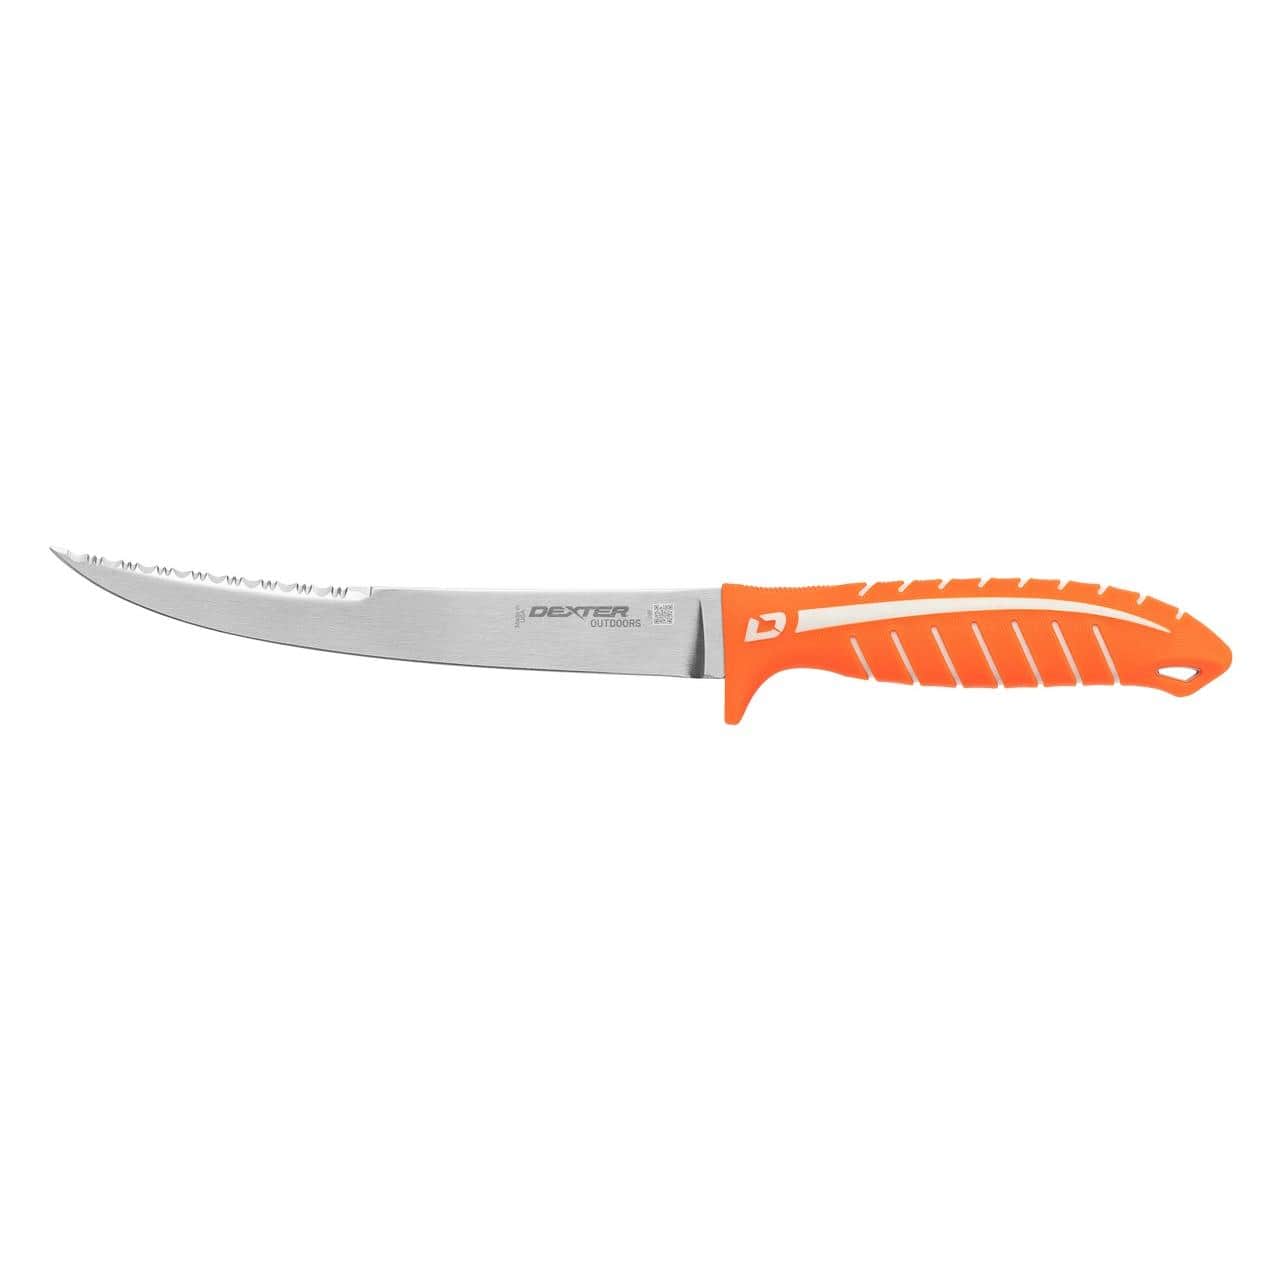 Dexter Knives: Your reliable fishing - Independent Marine